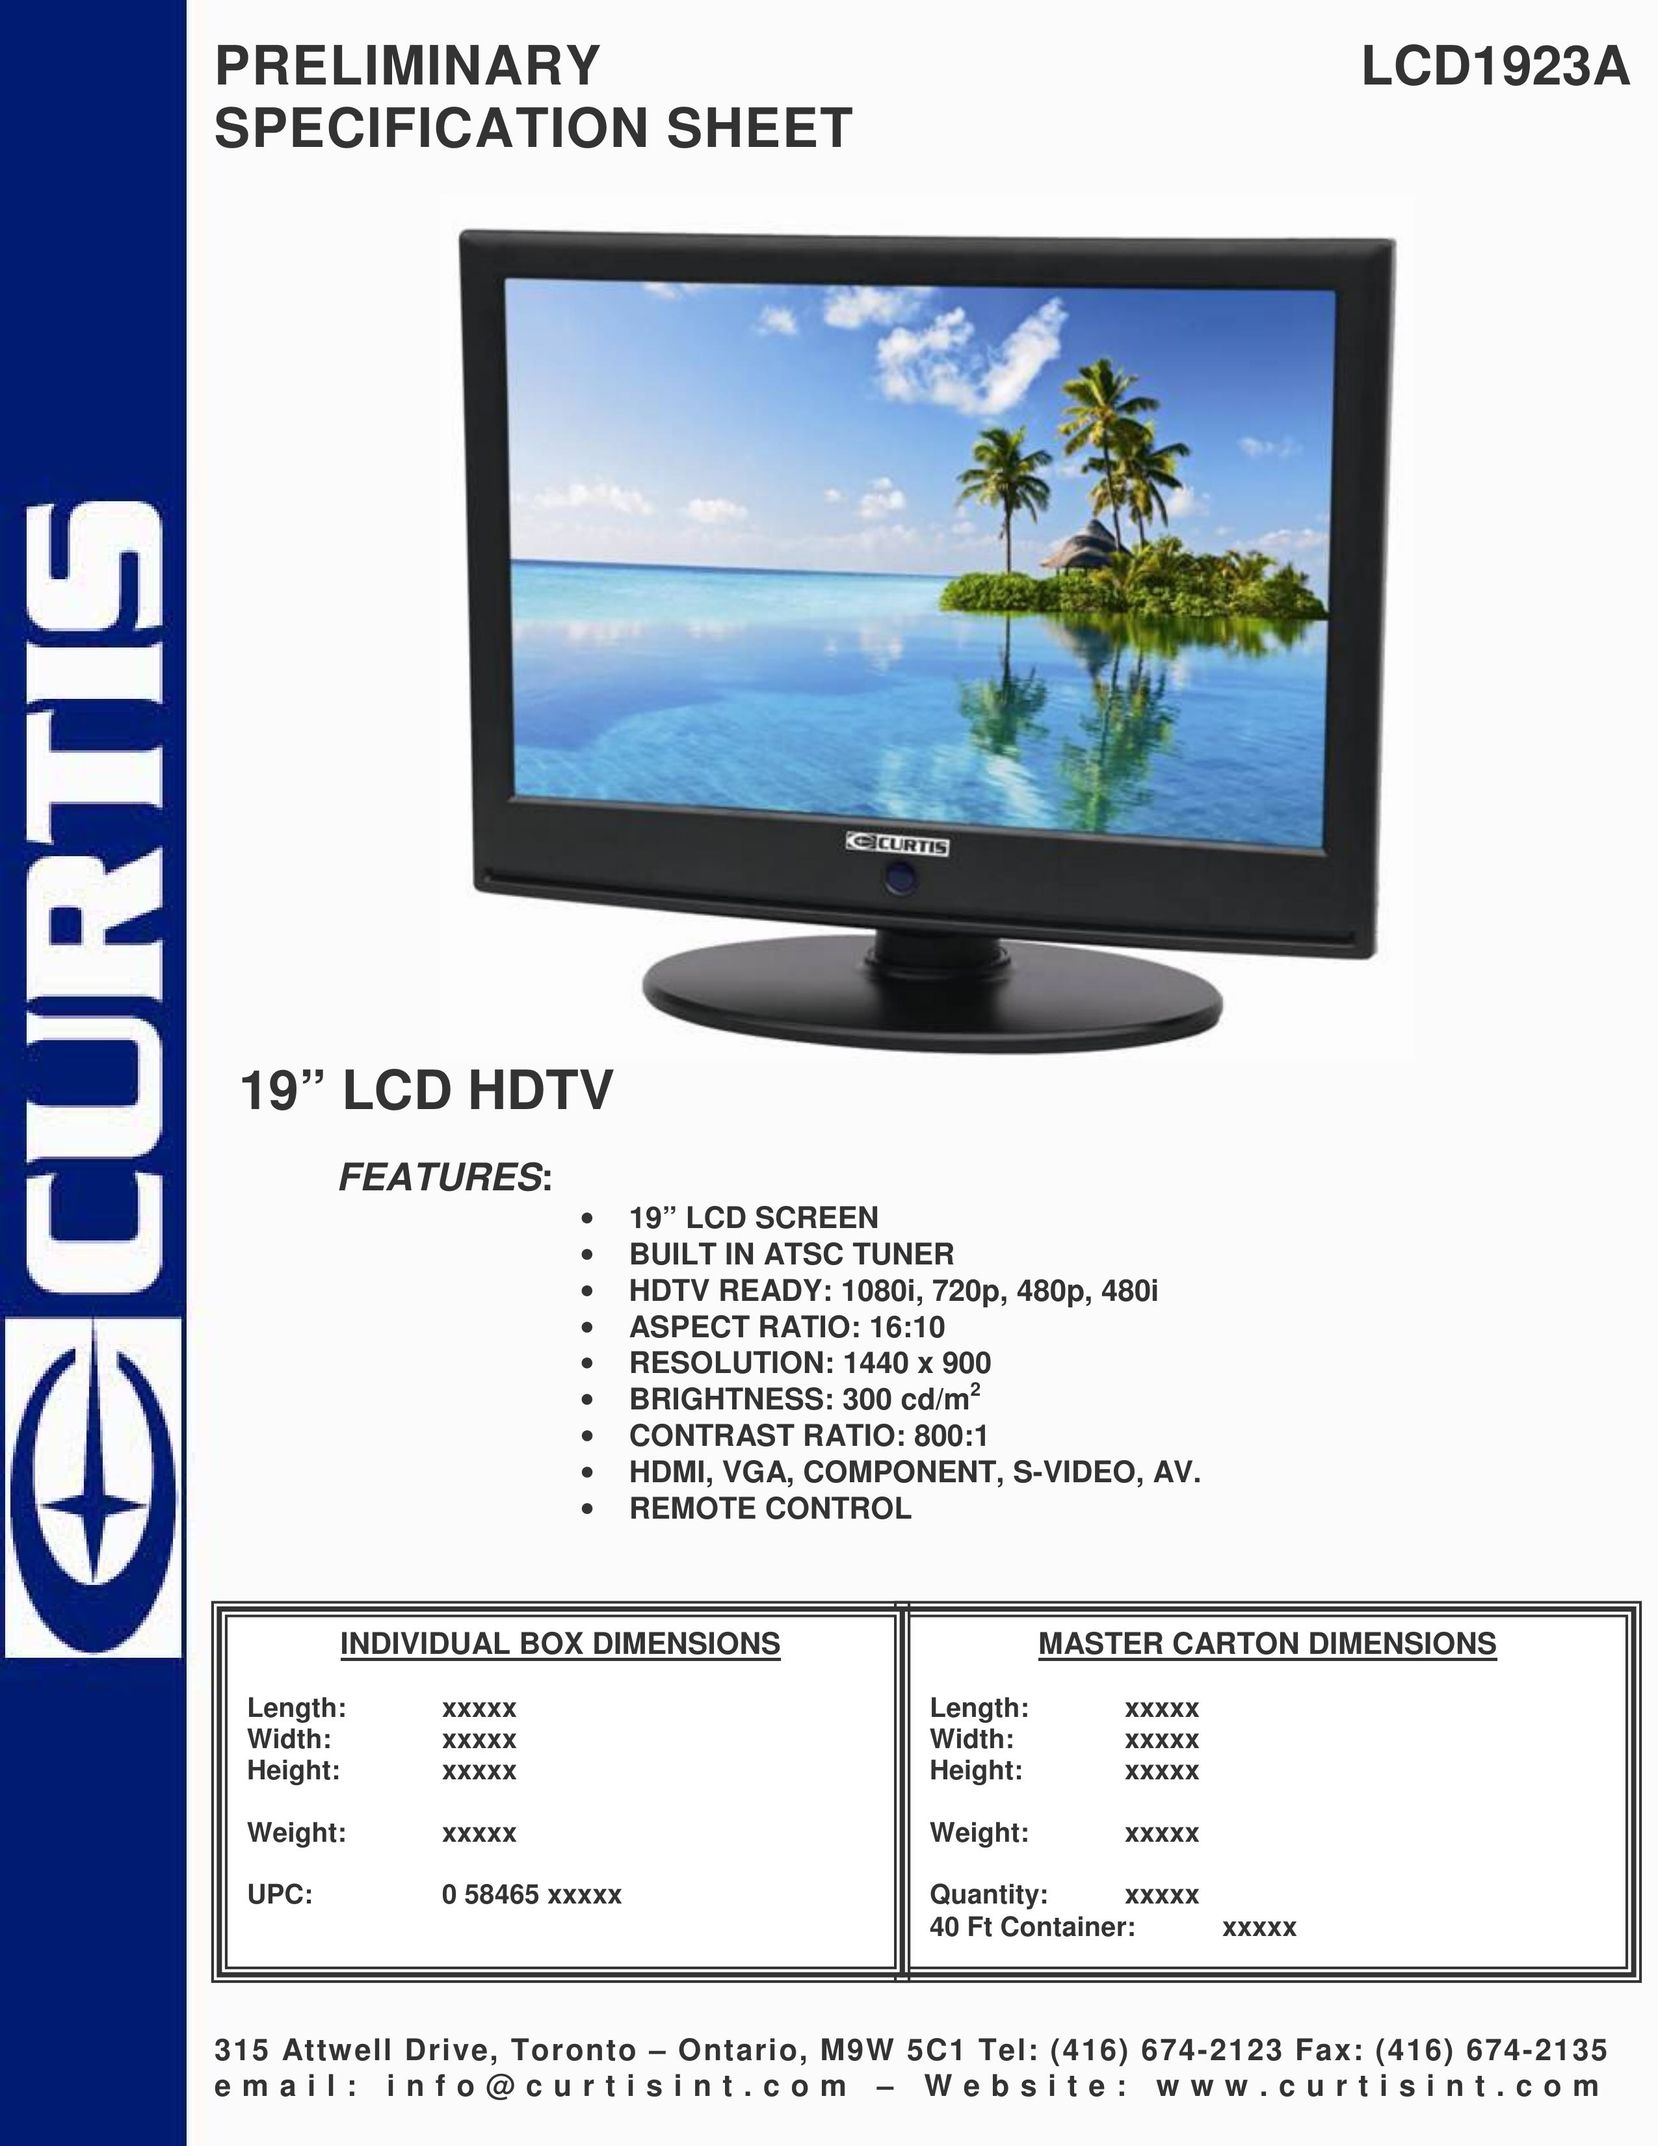 Curtis LCD1923A Flat Panel Television User Manual